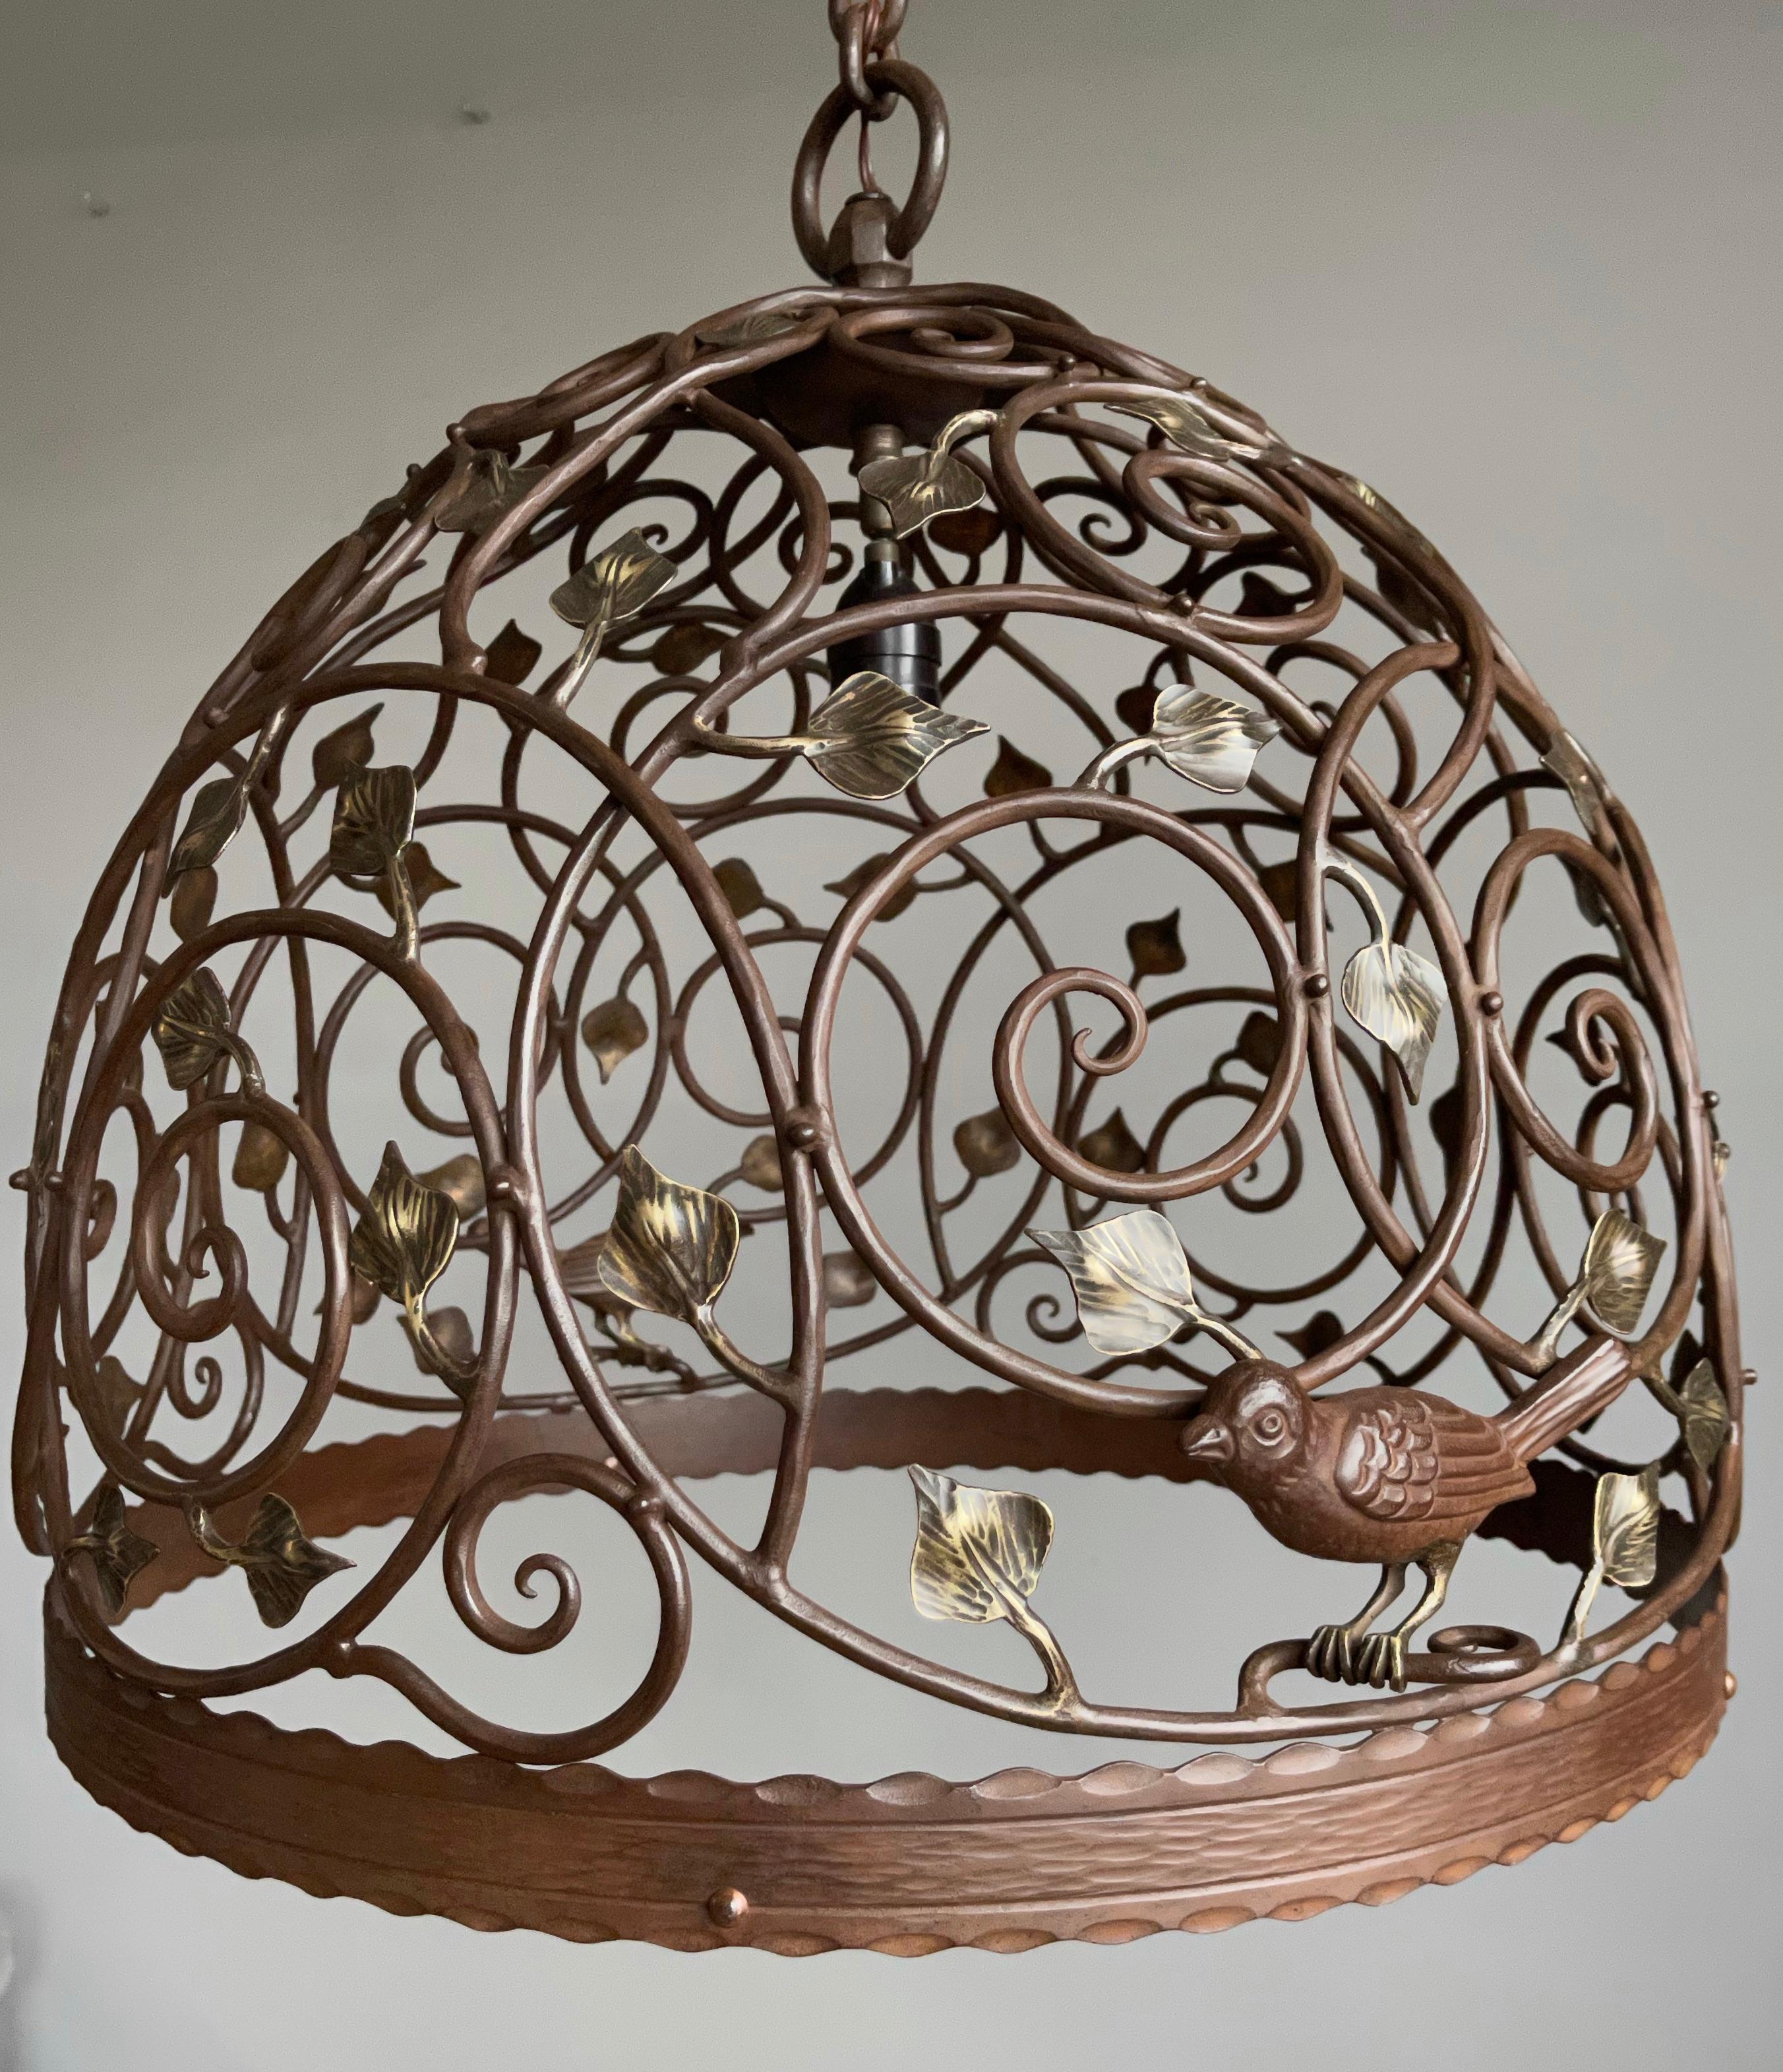 One of a kind and great looking antique pendant with decor of birds, branches and leaves. 

This great looking and all handcrafted wrought iron and bronze chandelier is another one of our recent great finds. The handcrafted swallow-like bird